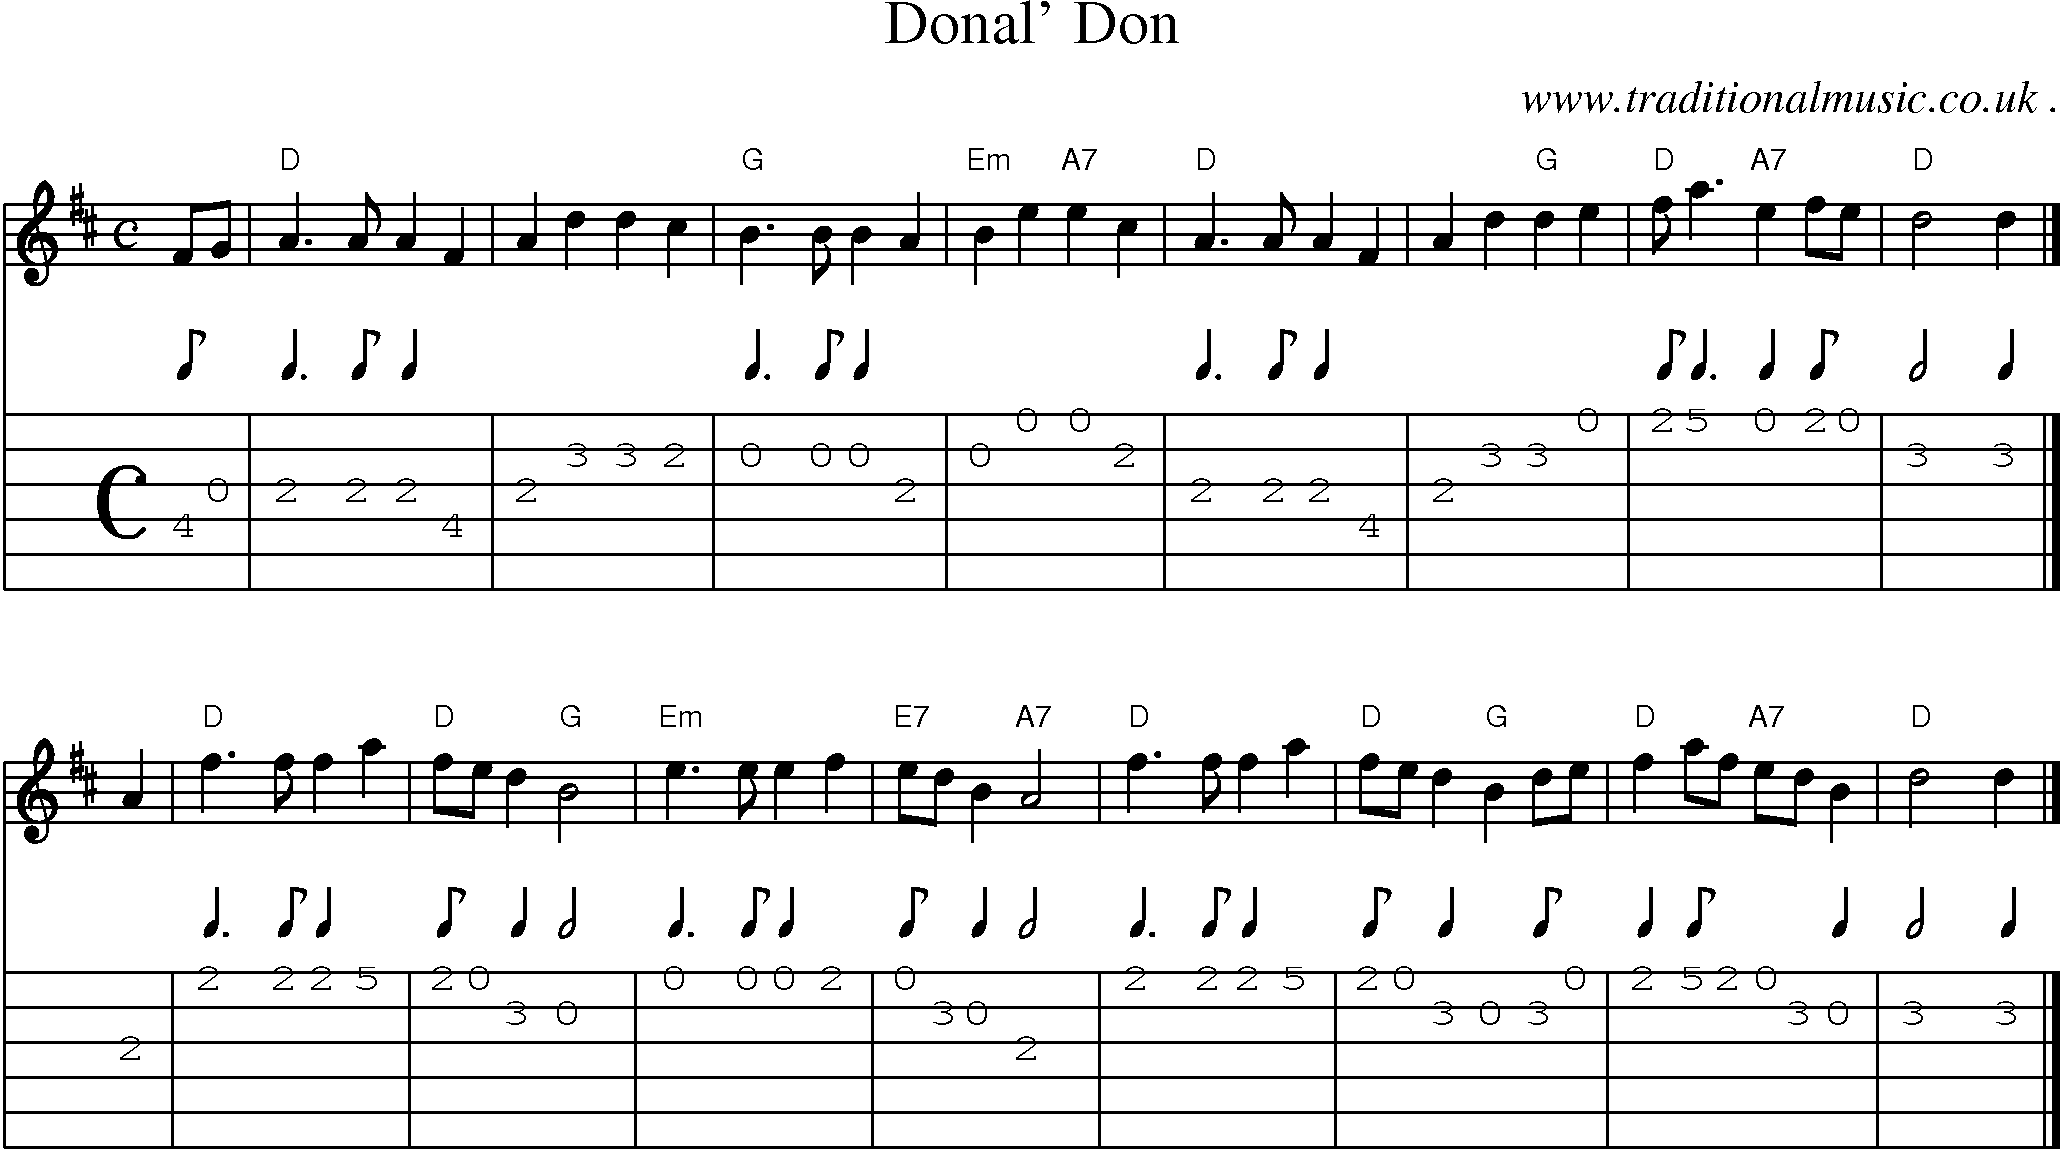 Sheet-music  score, Chords and Guitar Tabs for Donal Don